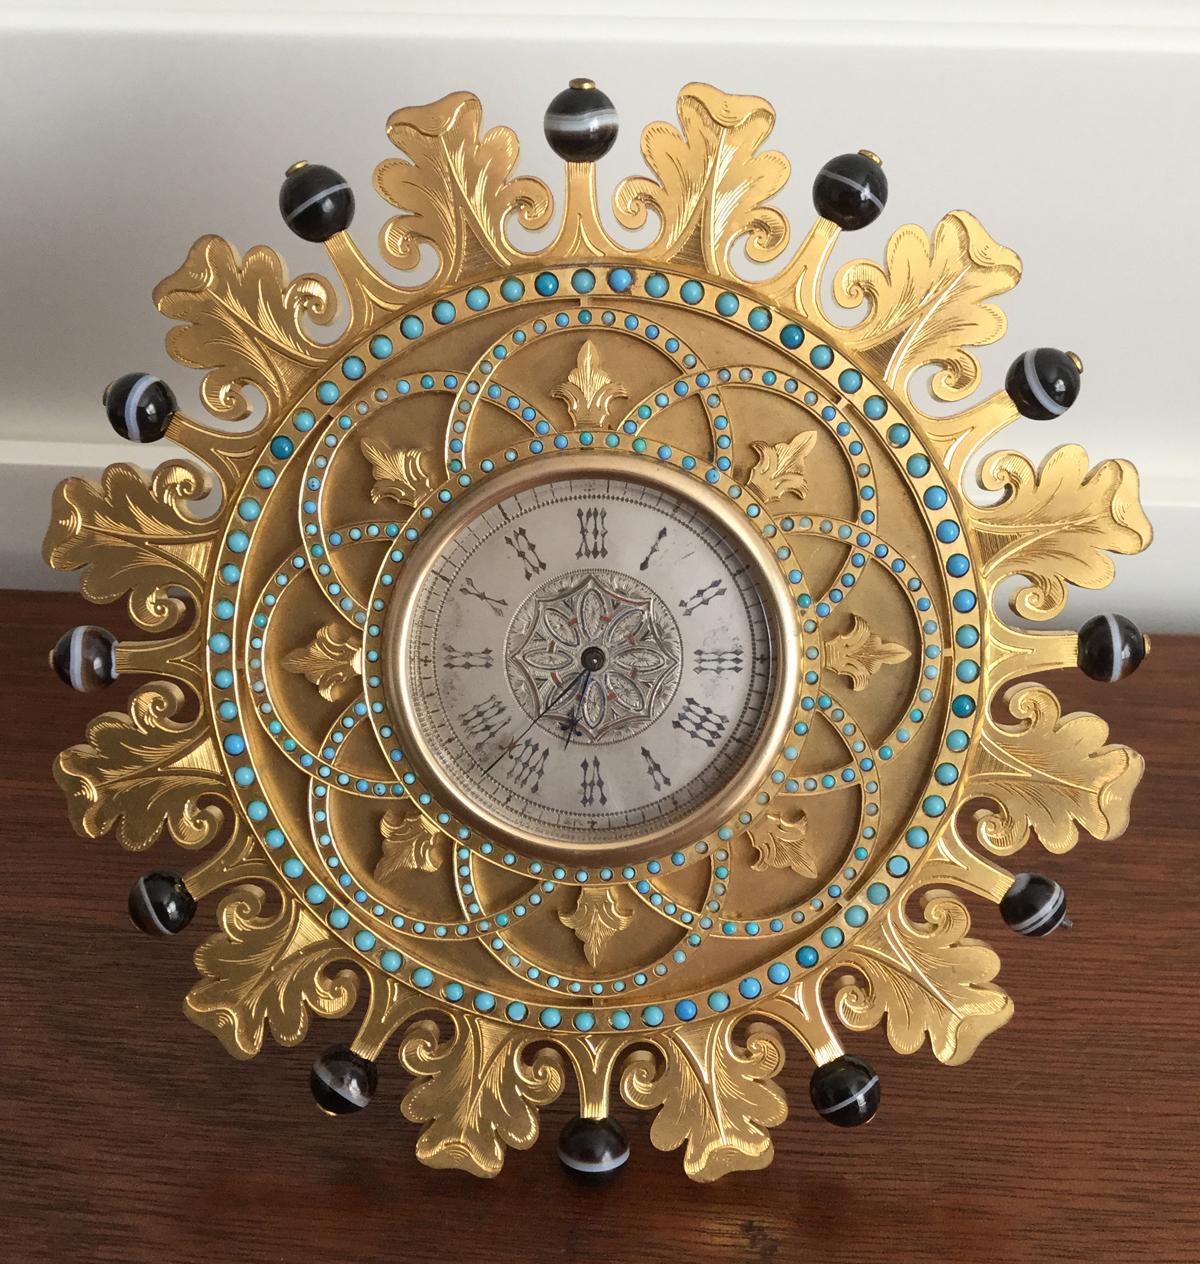 Gilt bronze strut clock - Howell James & Co, 19th century.

A beautiful petite gilt bronze sun shaped strut clock by Howell James & Co, clock makers to Queen Victoria. This clock is contained in a blue case with Dual crown ducal monograms to the